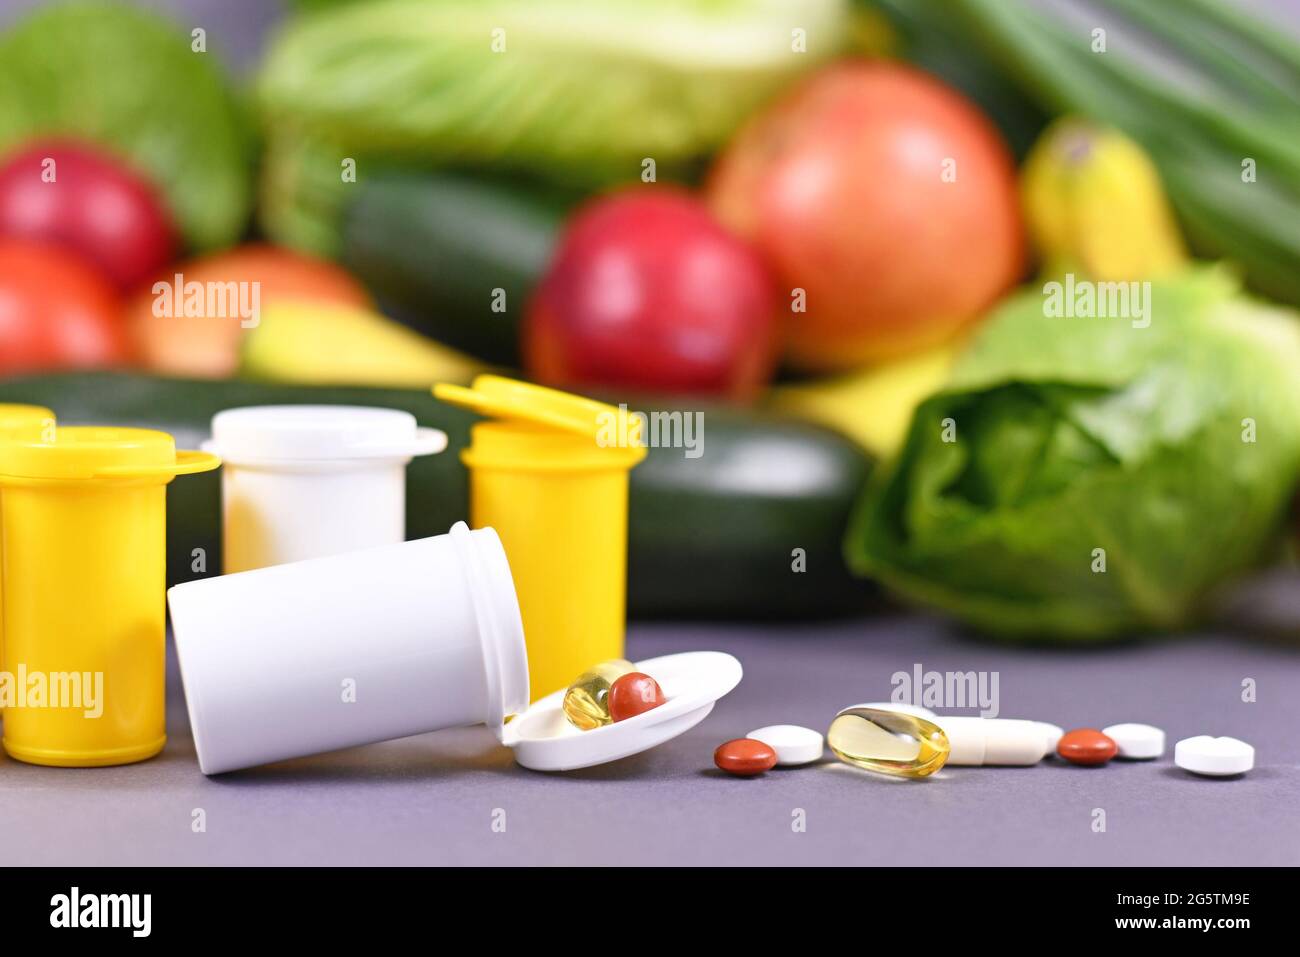 Pills of food nutrition supplements spilling out of bottle in front of fruits and vegetables in background Stock Photo